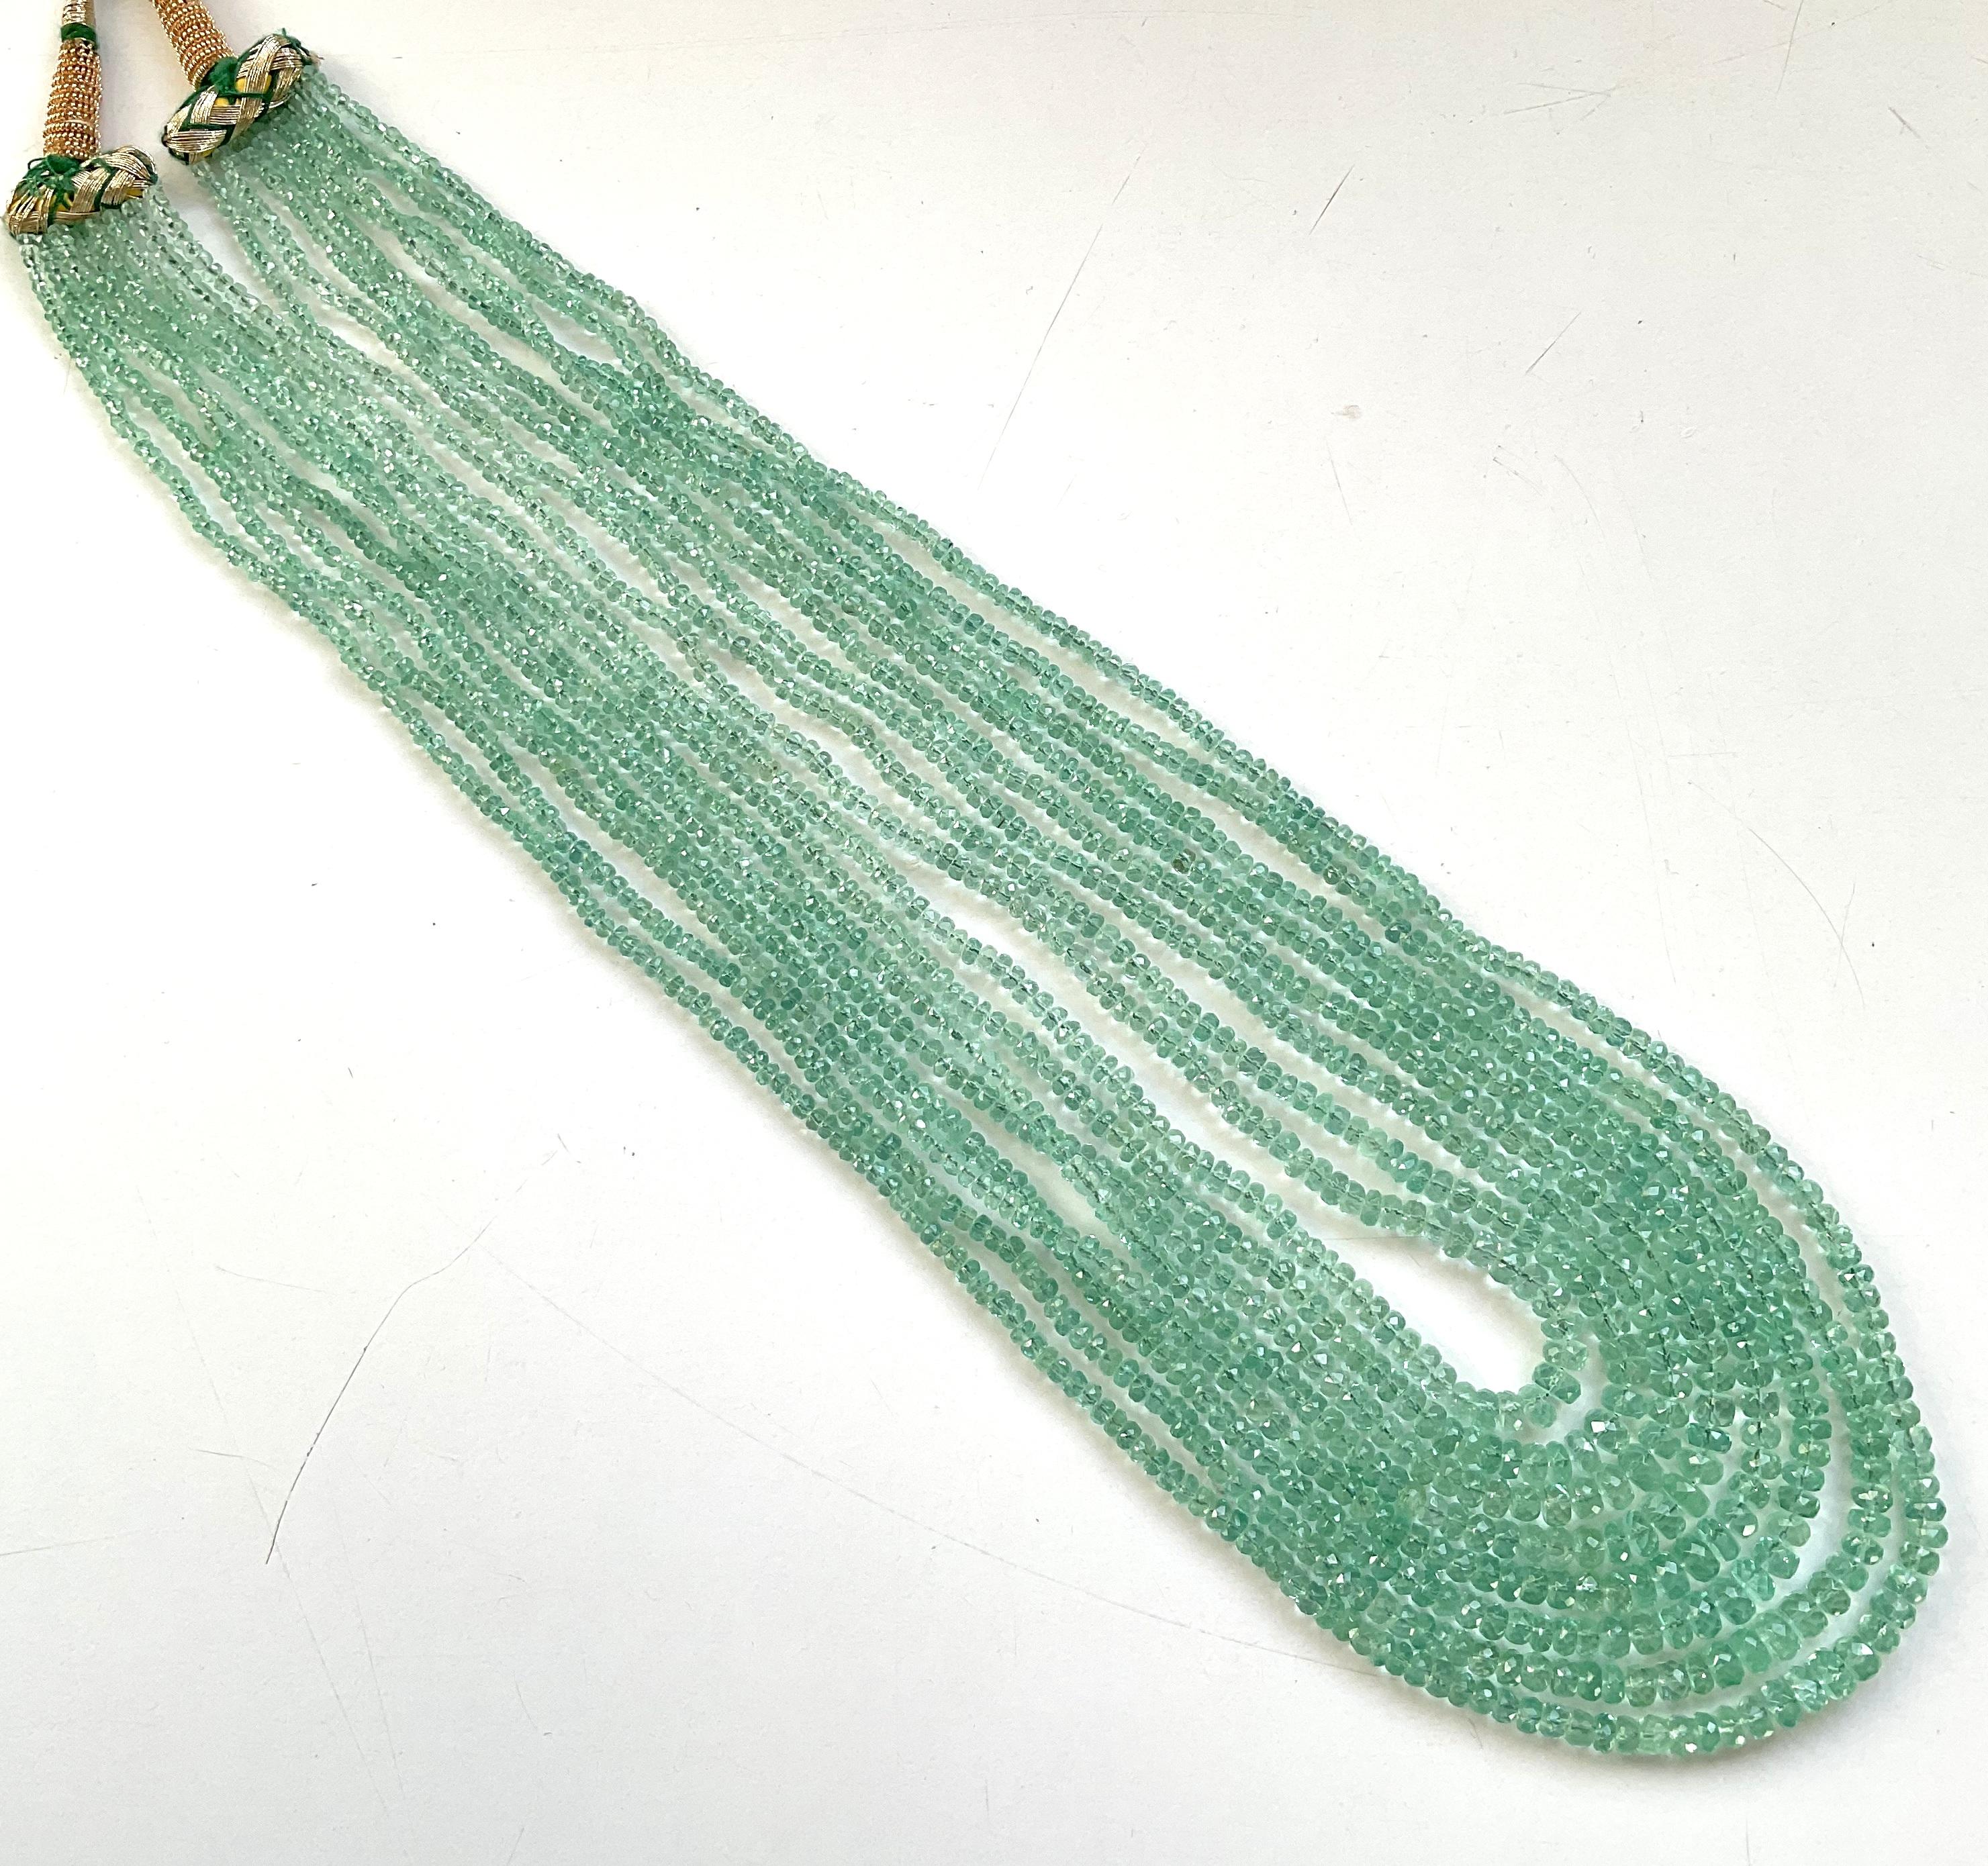 Art Deco 342.09 Carats Panjshir Emerald Faceted Beads For Fine Jewelry Natural Gemstone For Sale